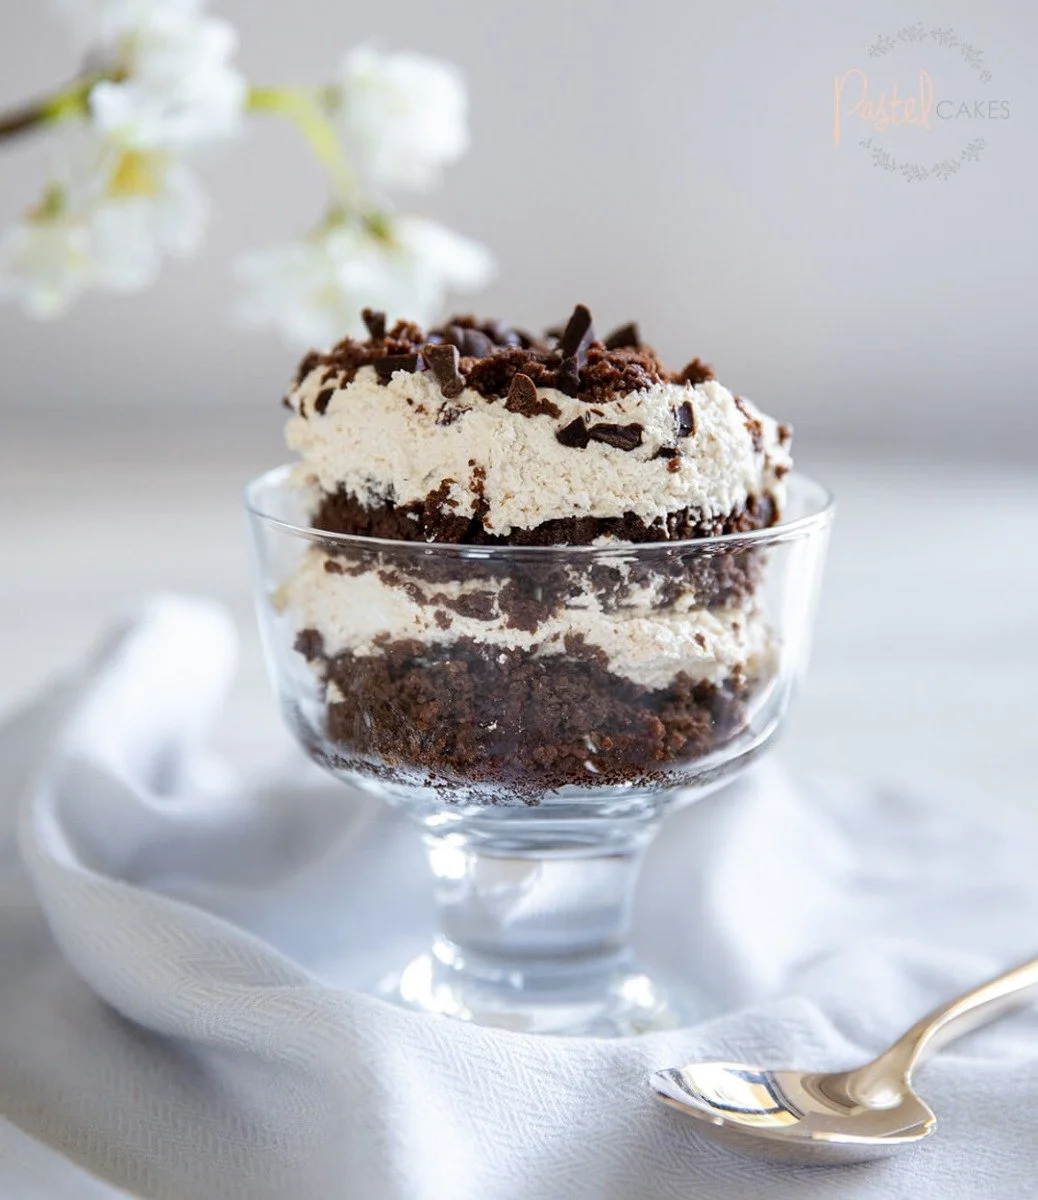 Keto Chocolate Dessert Cup by Pastel Cakes